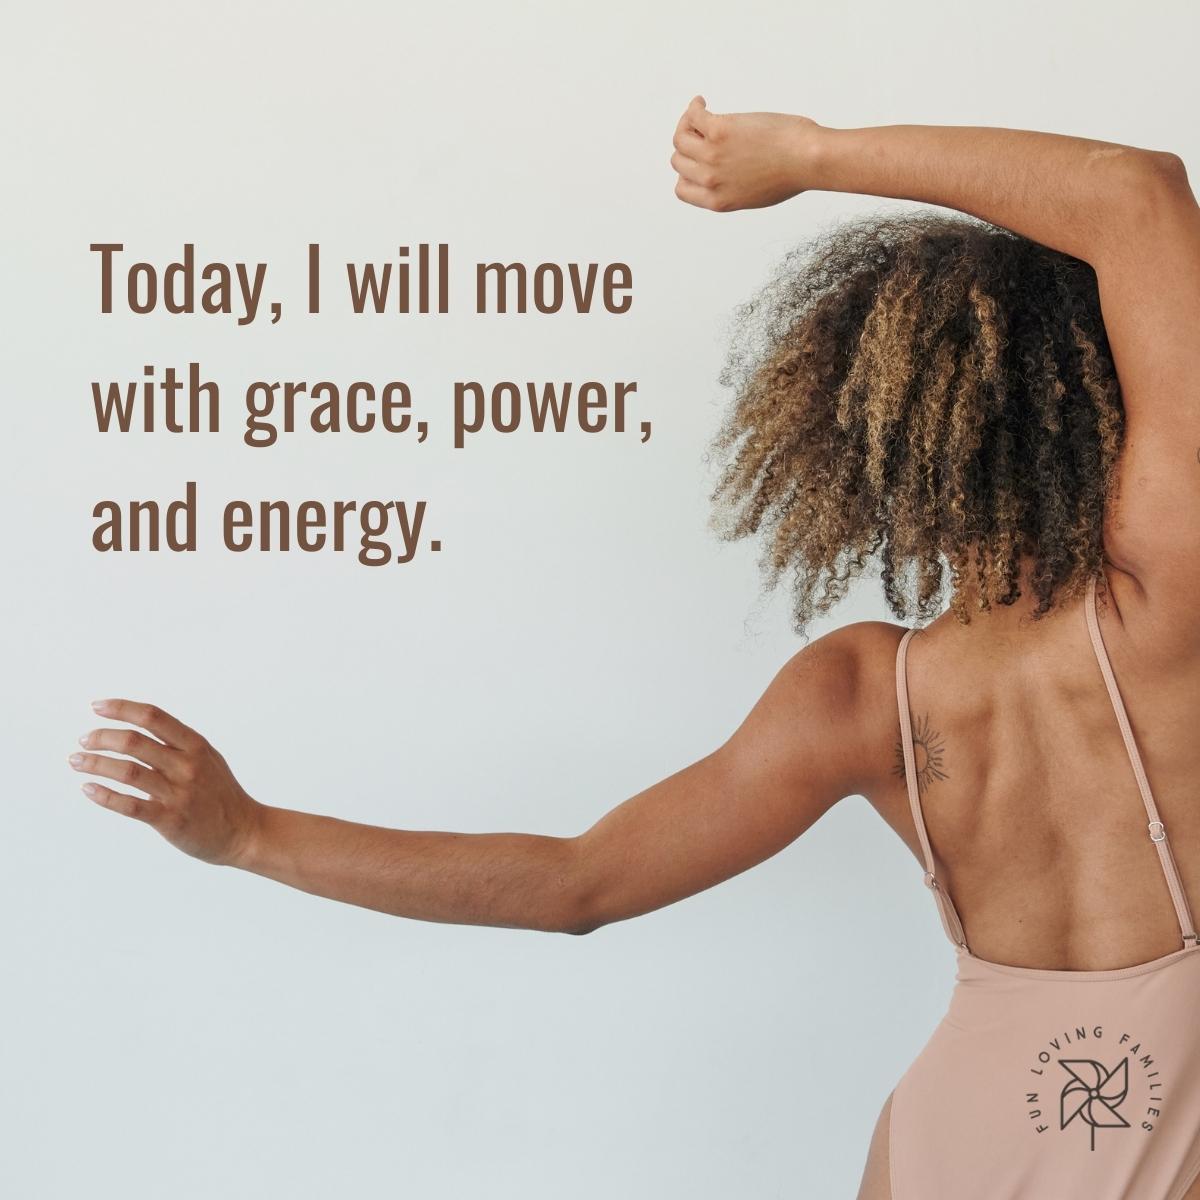 Today, I will move with grace, power, and energy affirmation